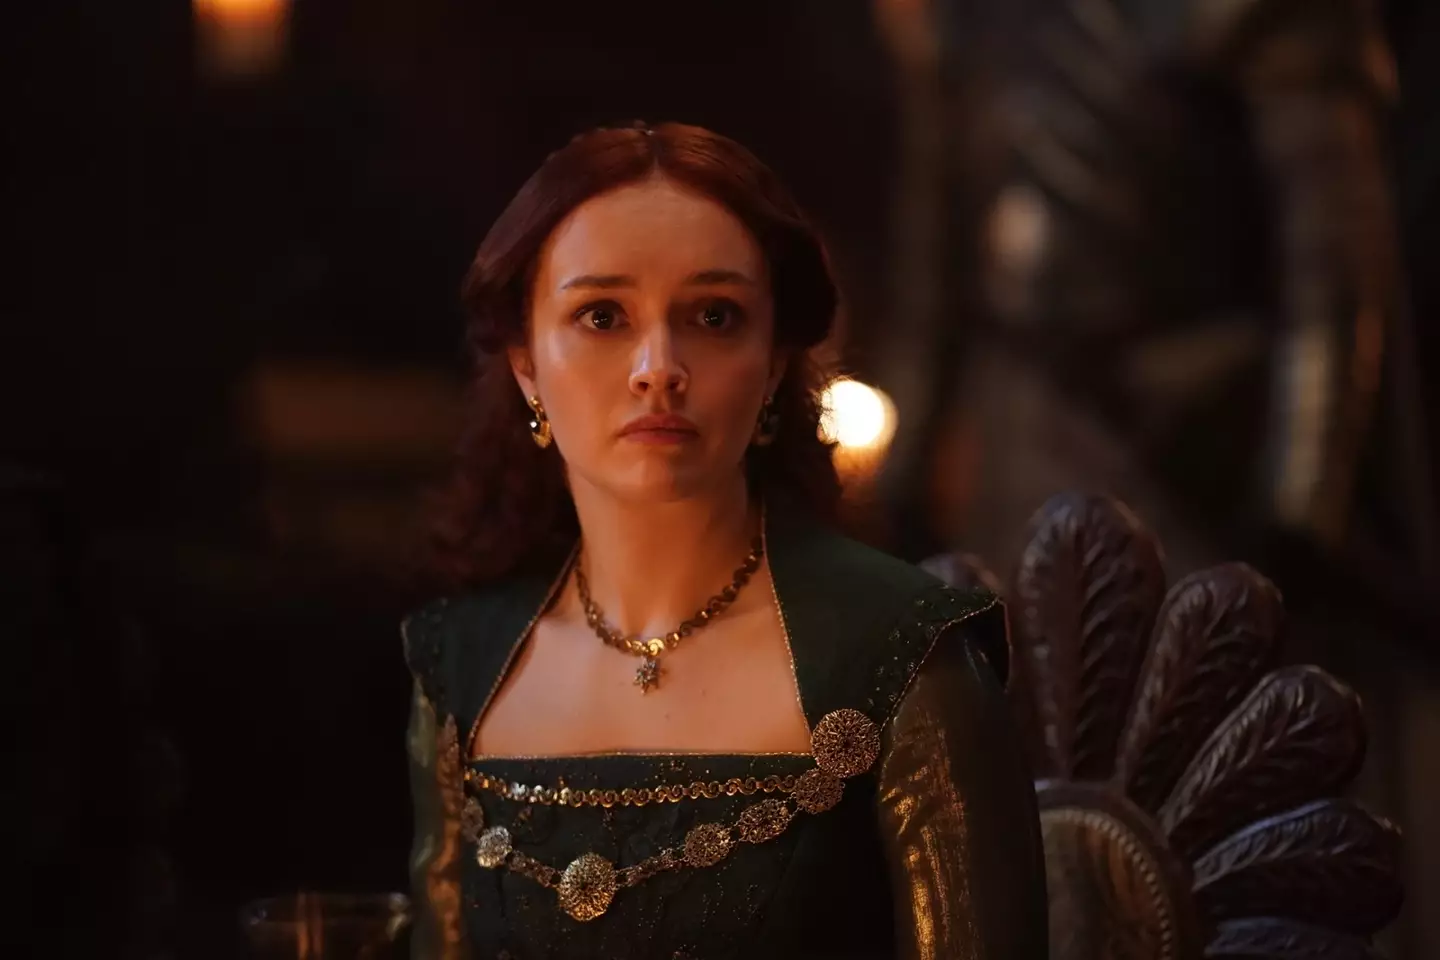 Olivia Cooke will play an older Alicent Hightower.